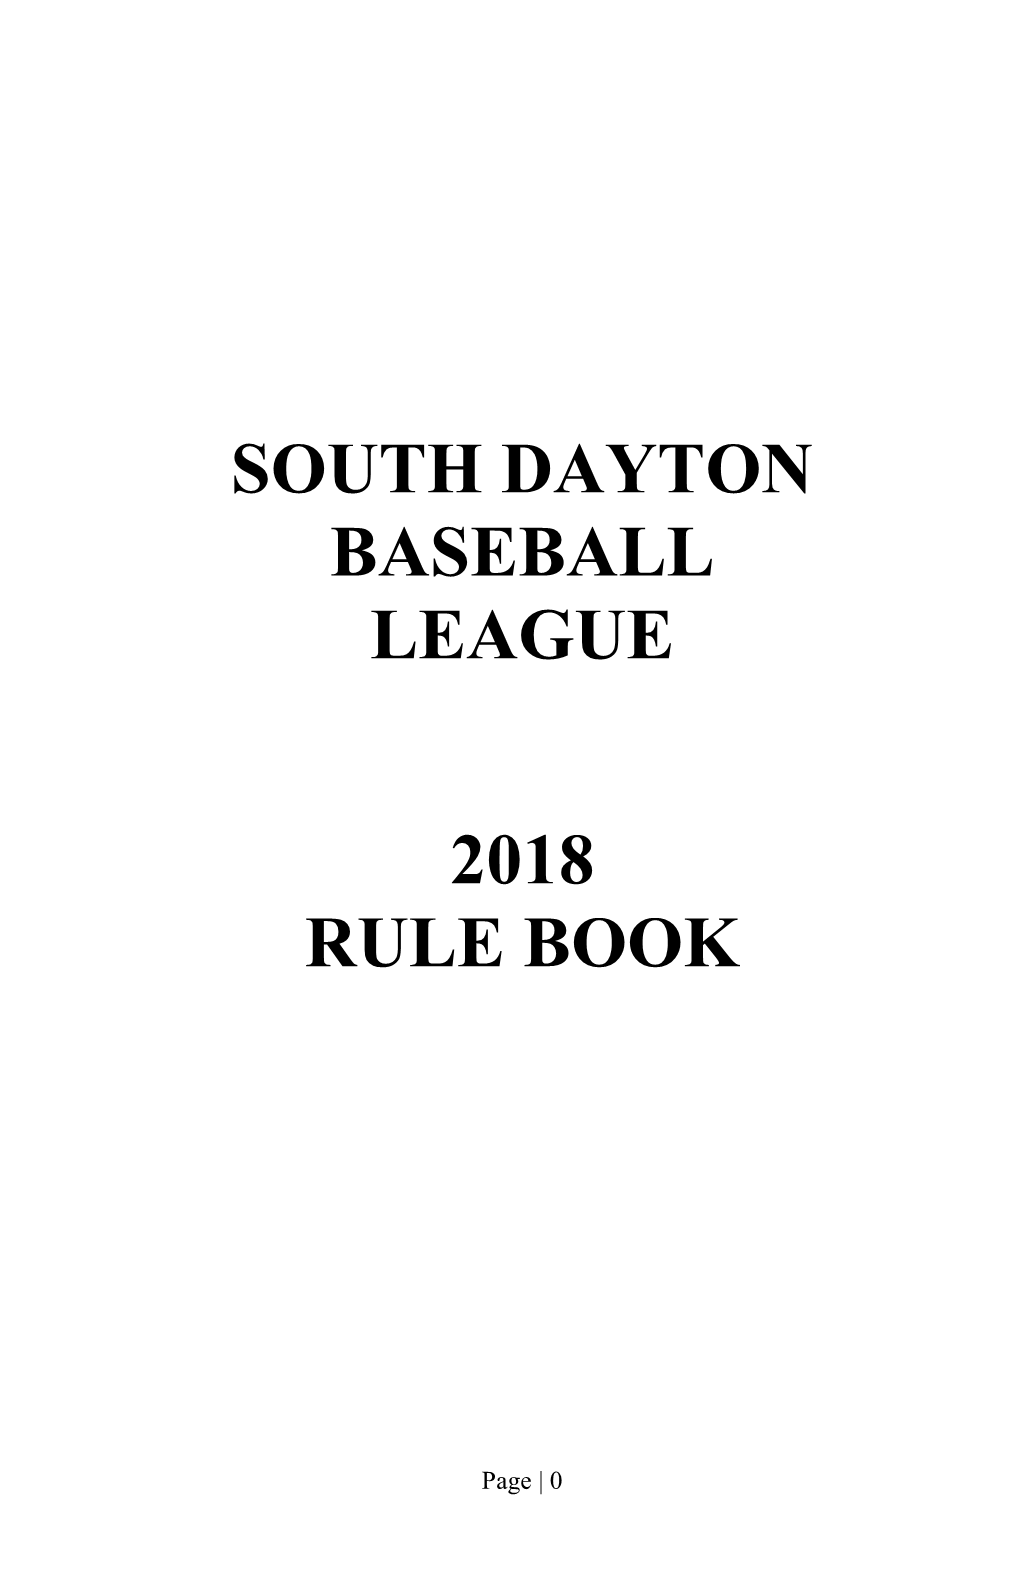 Baseball Rules Will Be Used for Boys Baseball Except As Noted in the Individual League Rules